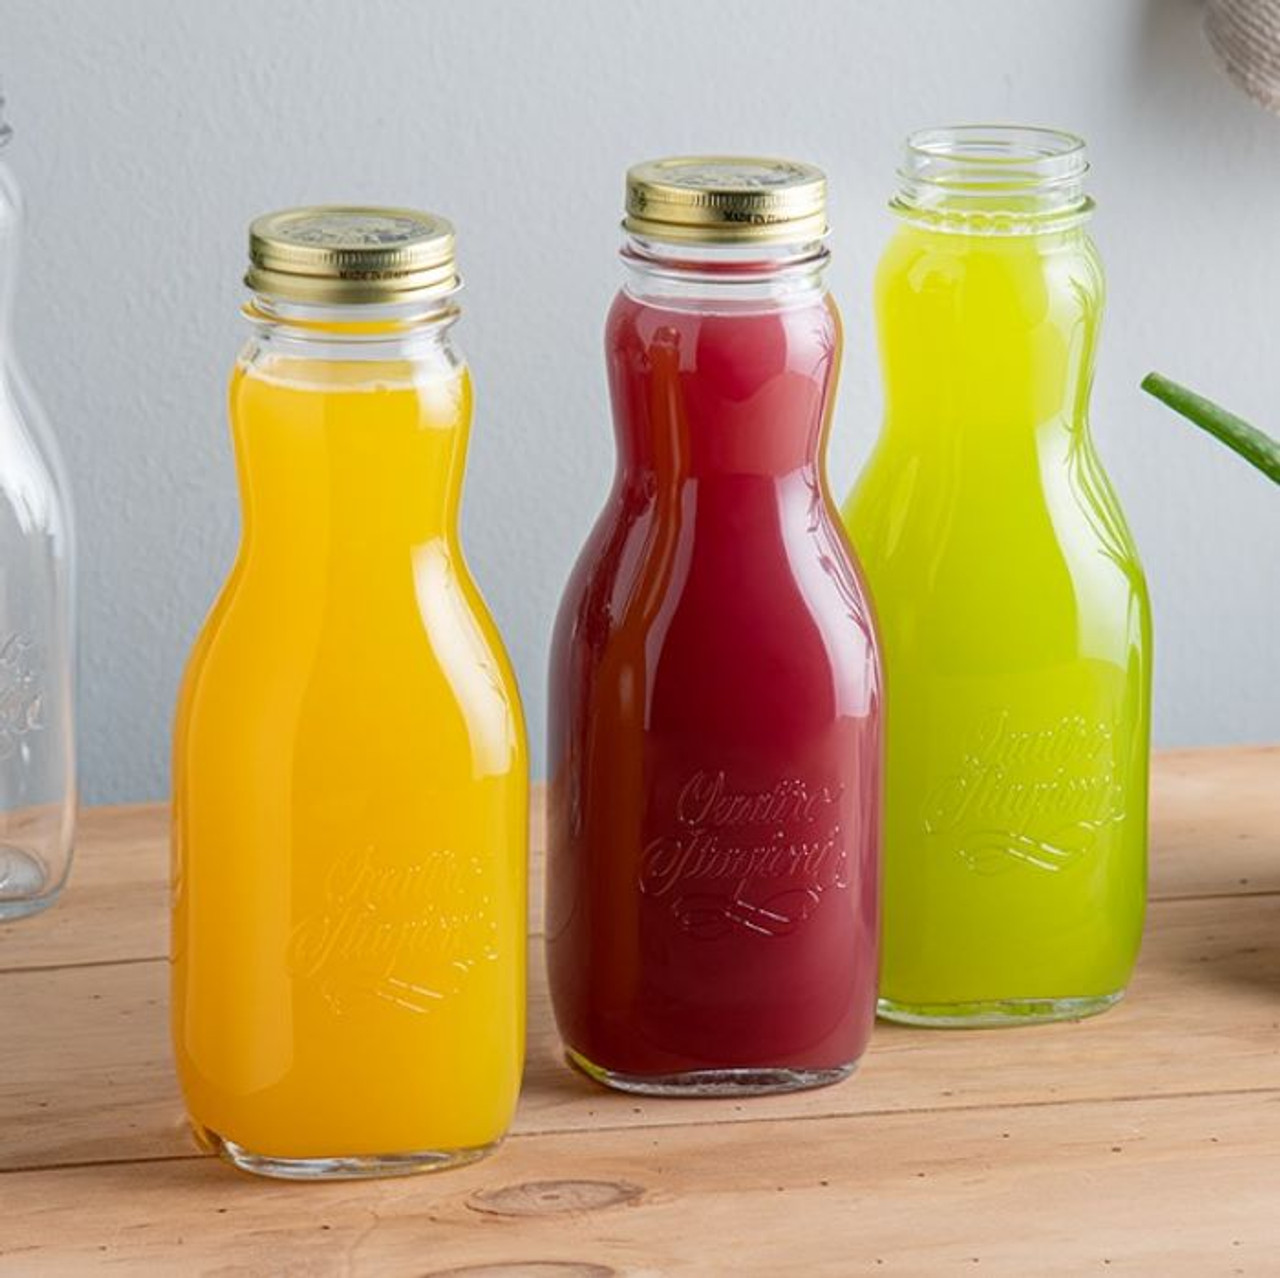 Store your favorite Juices